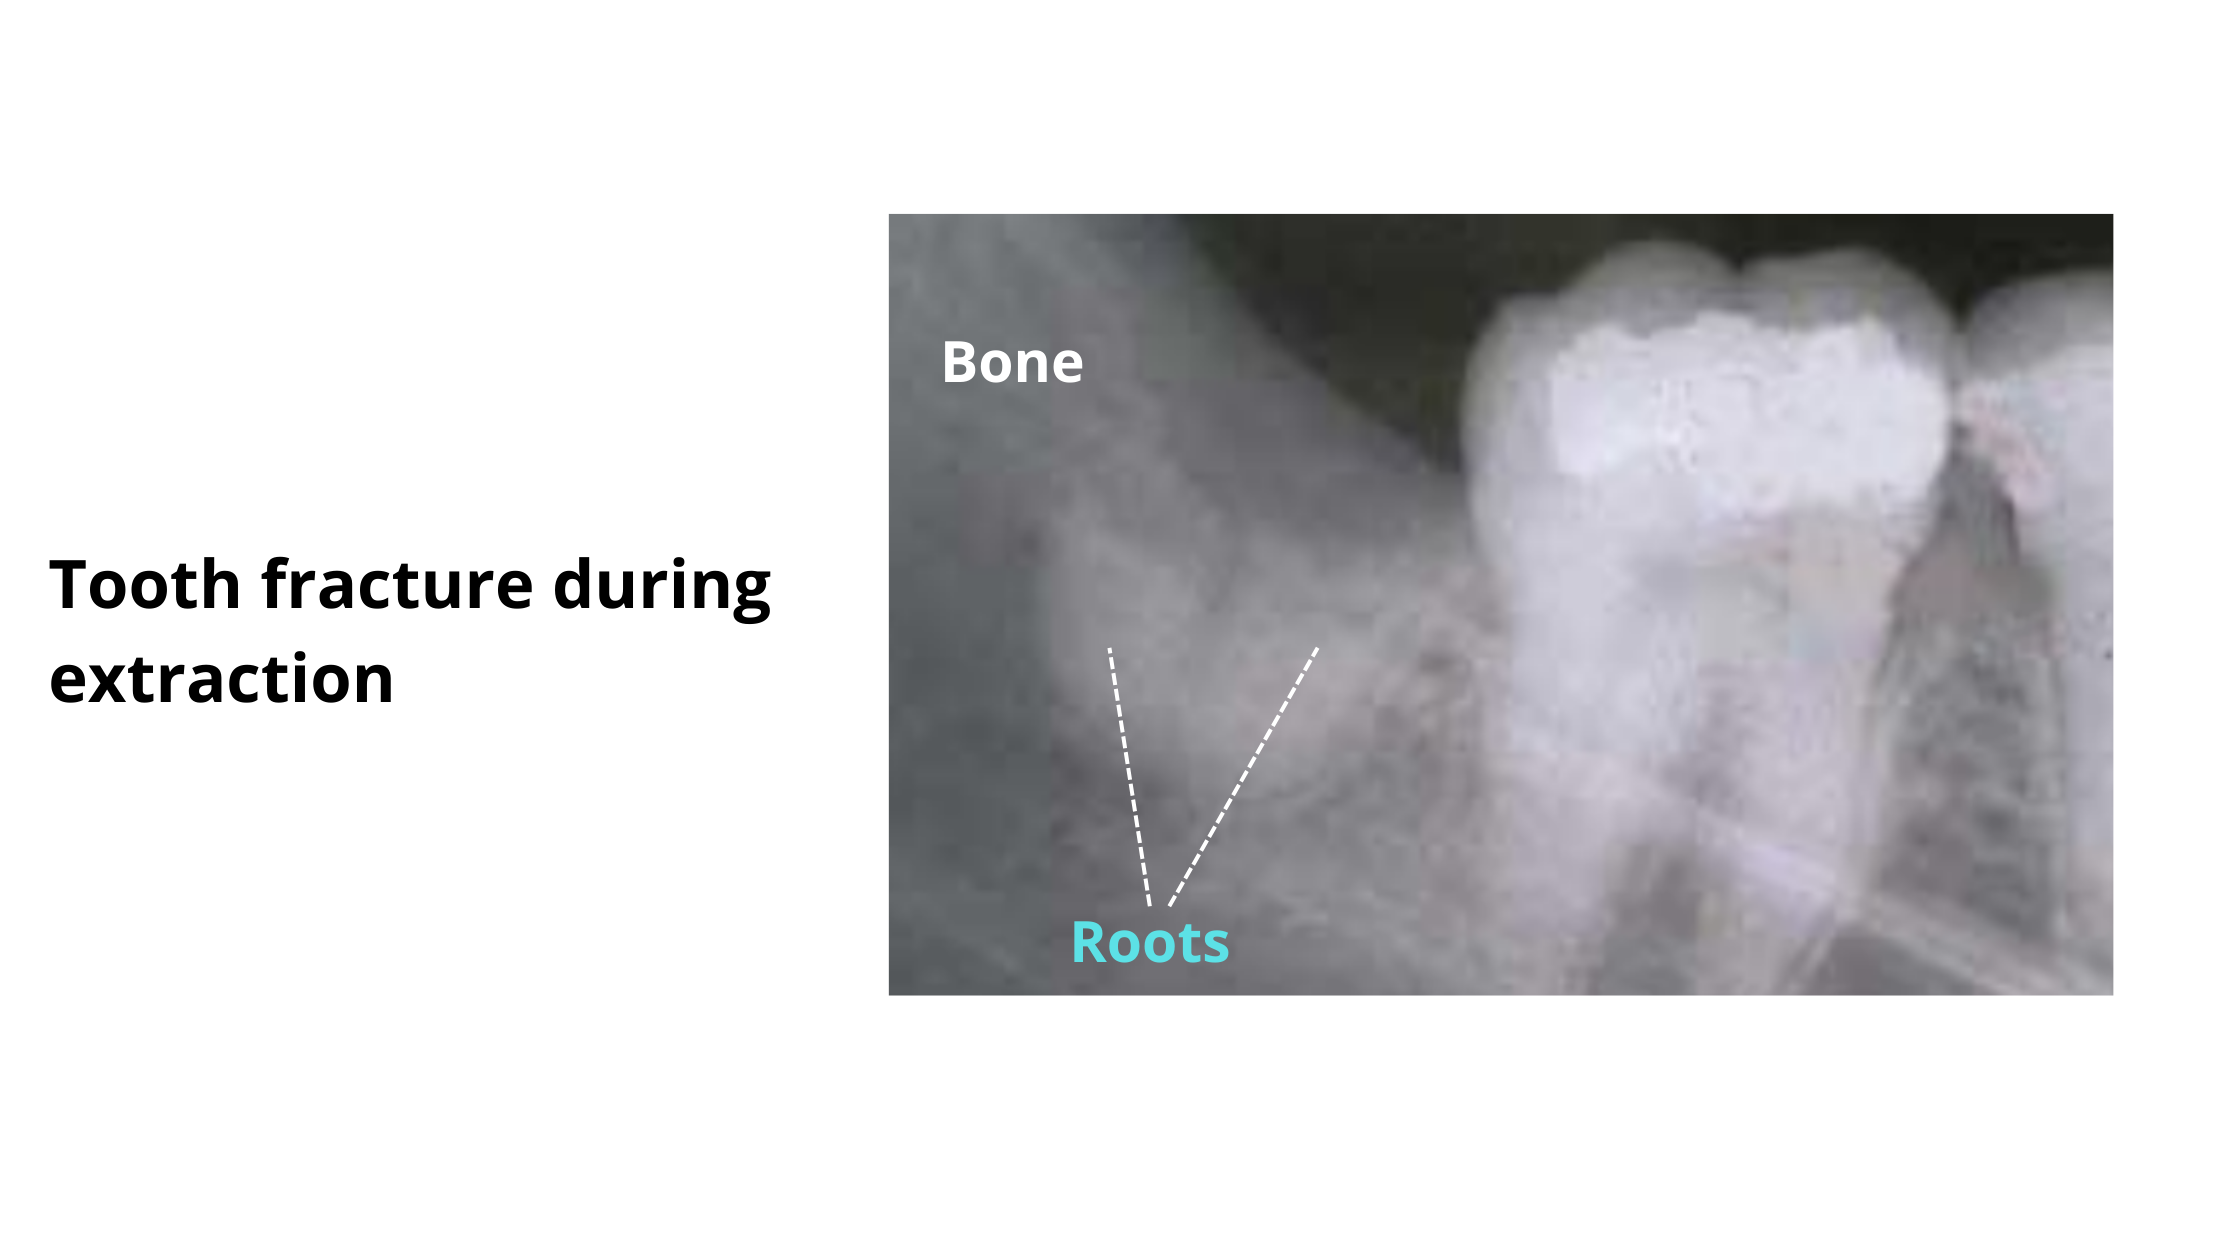 Dental X-ray showing root fracture of an extracted tooth